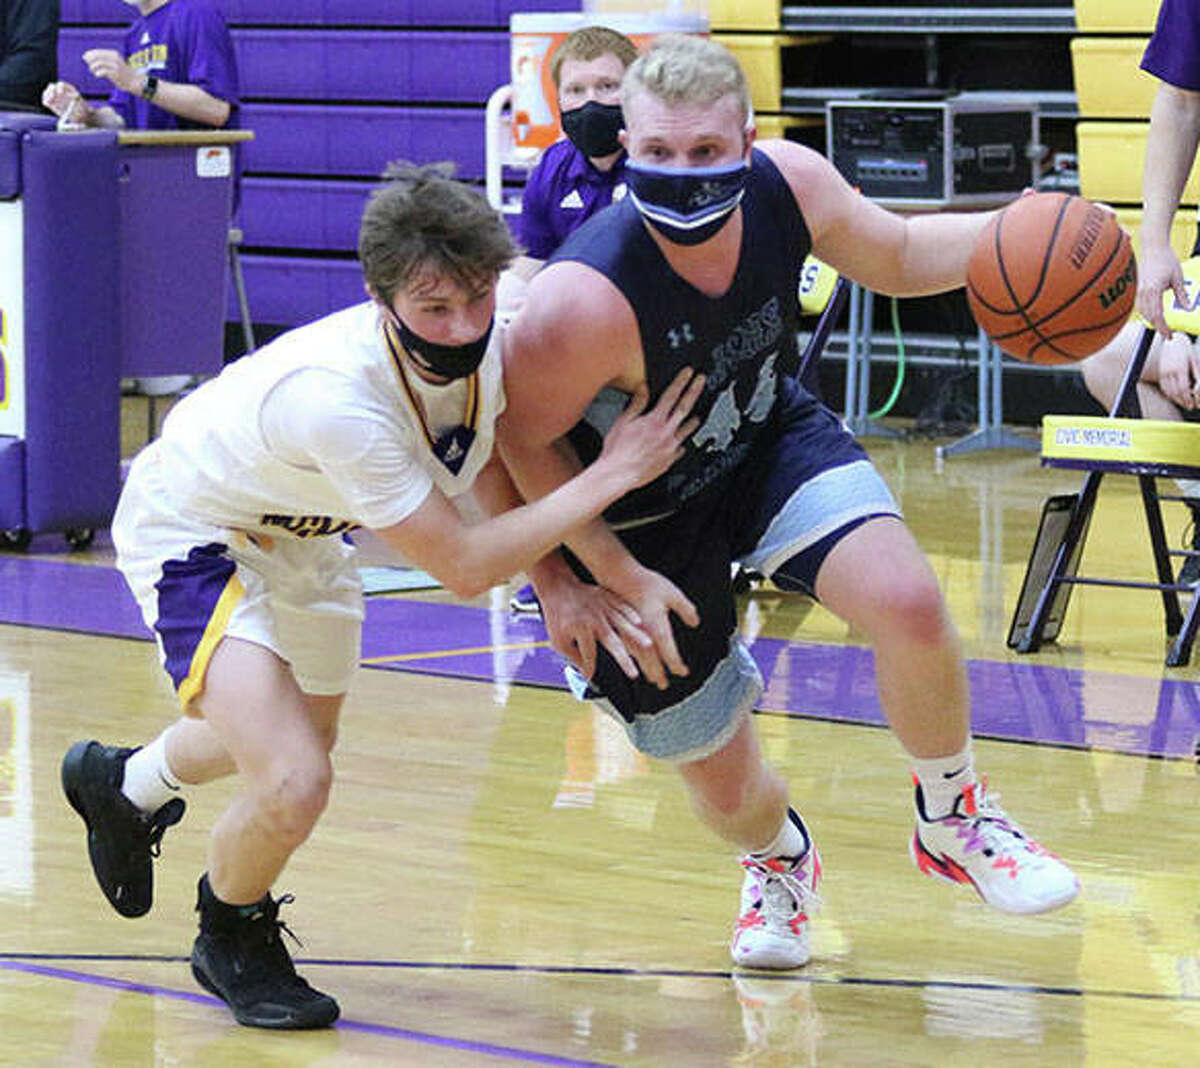 Jersey’s C.J. Brunaugh (right) powers past CM’s Dathan Greene on a drive to the basket in the first half of a Mississippi Valley Conference boys basketball game on Monday night in Bethalto.